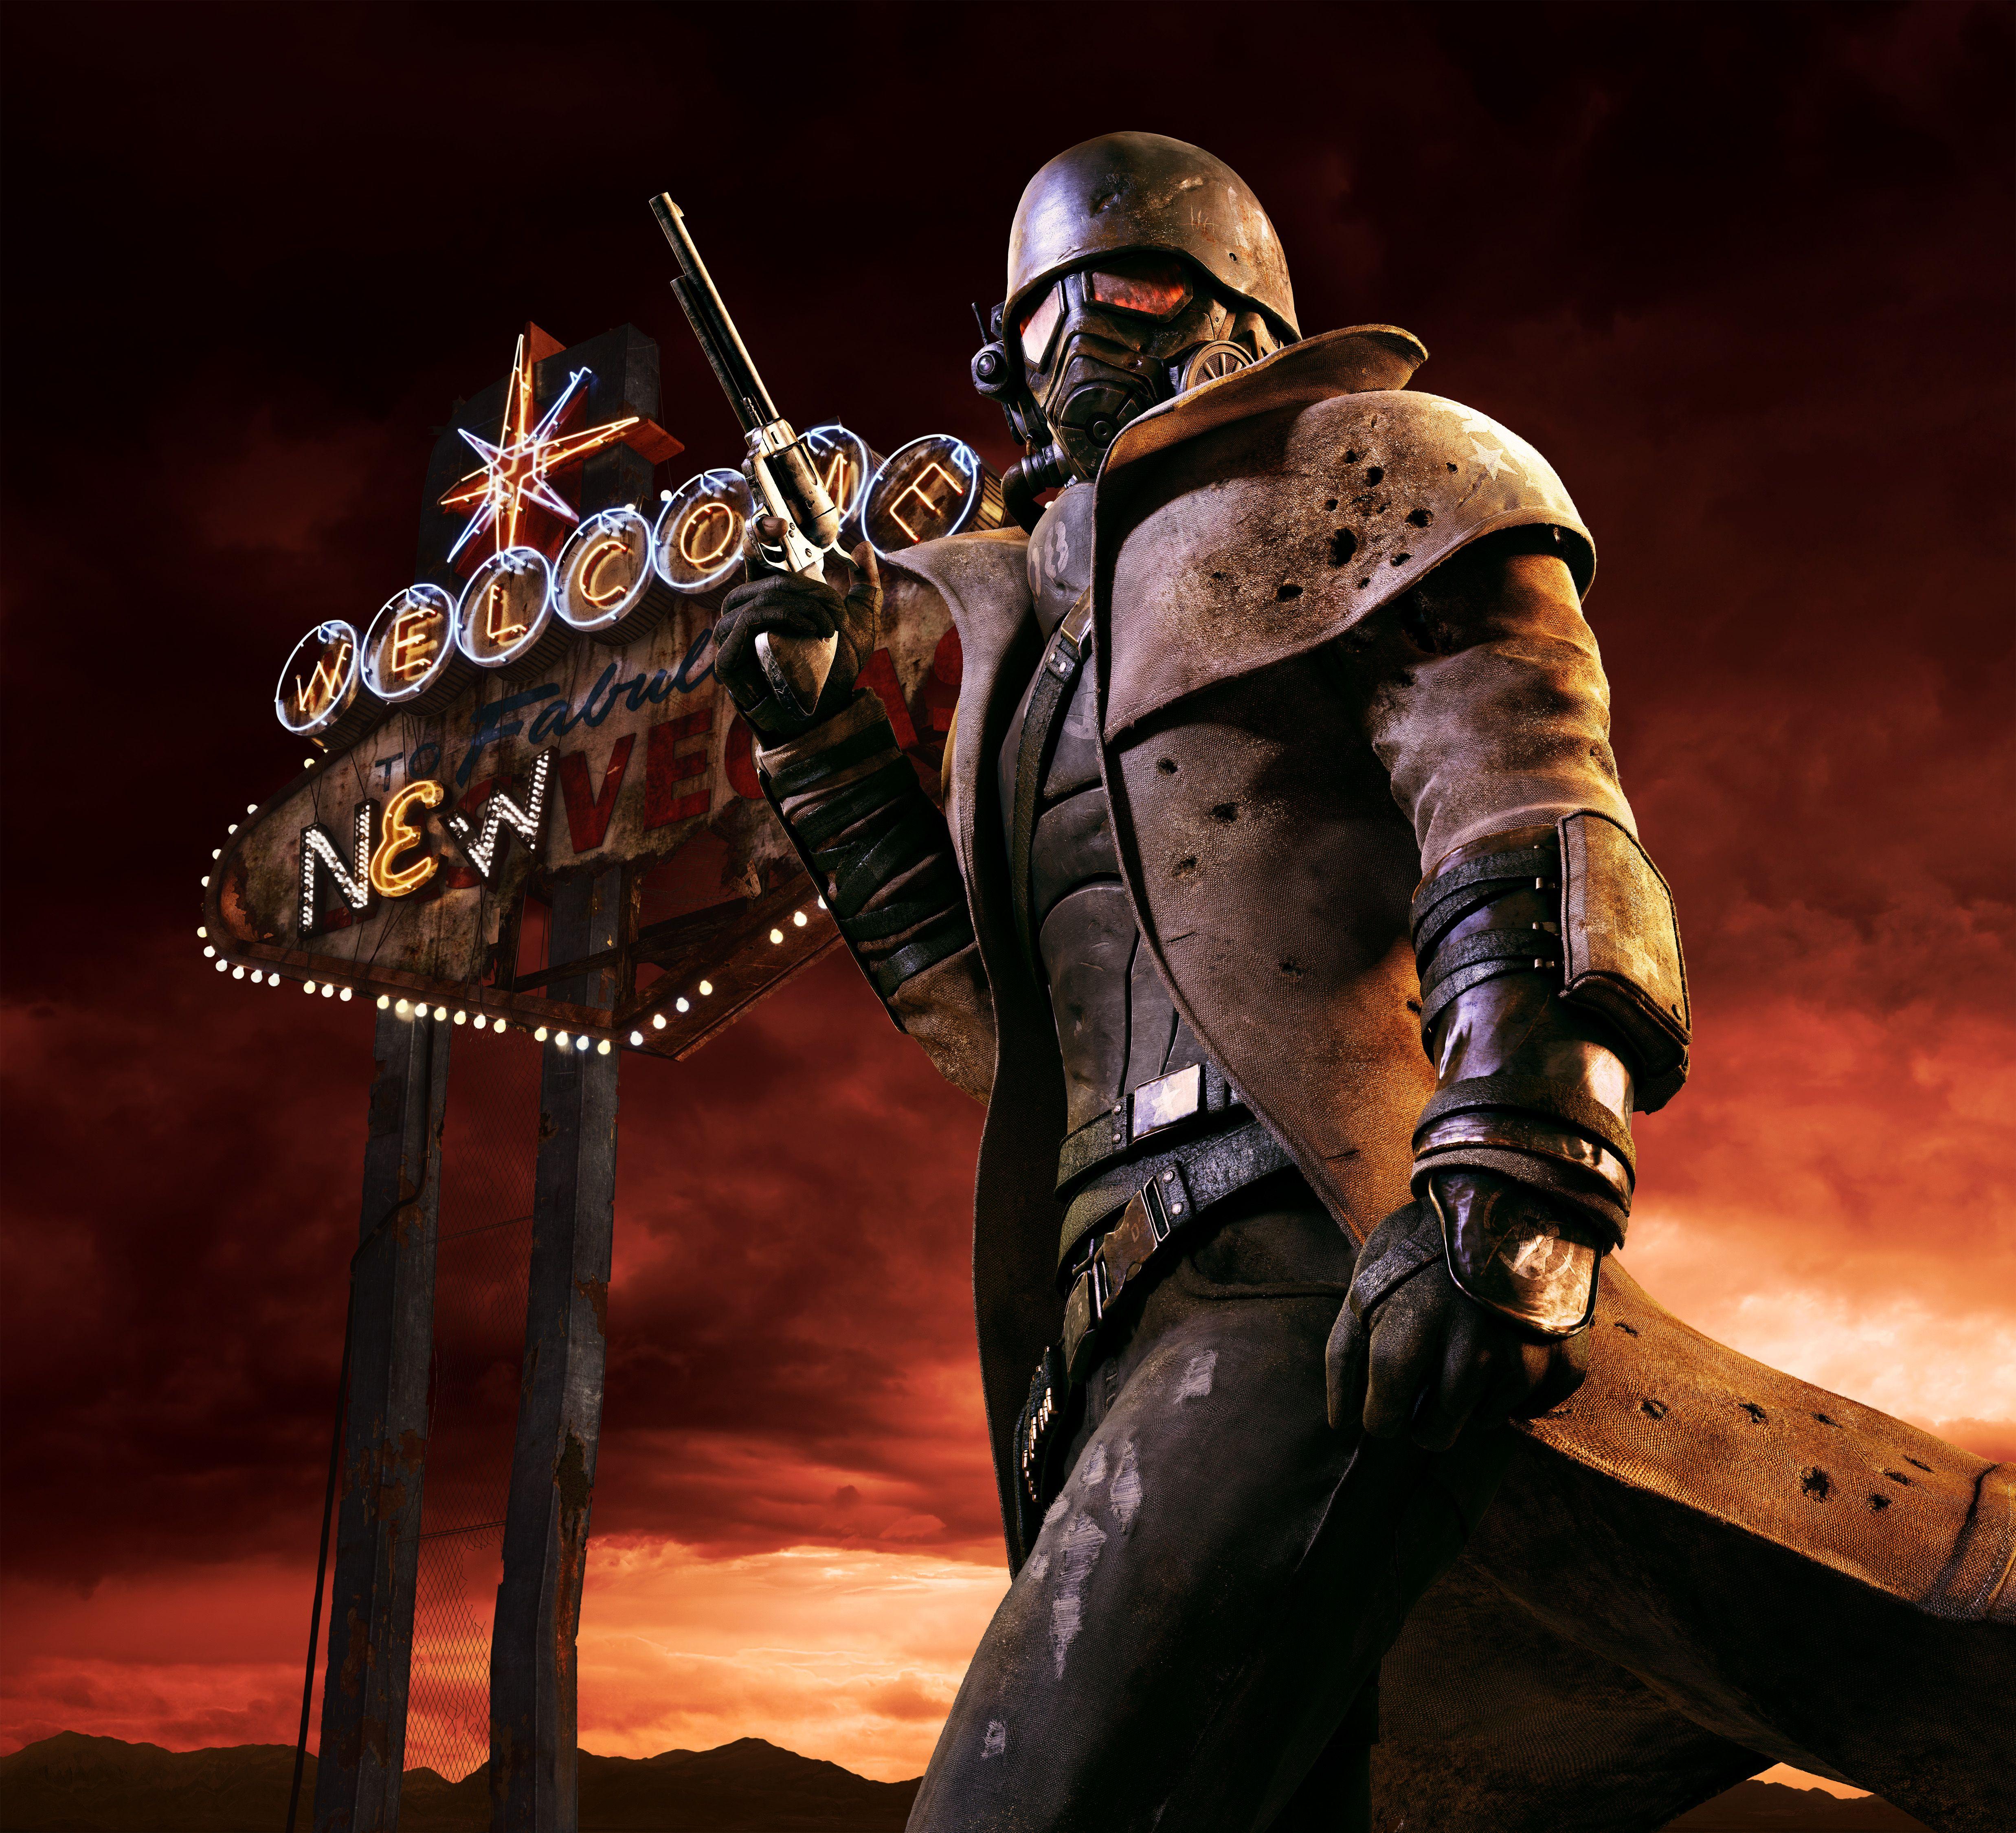 Fallout New Vegas Iphone Wallpapers Top Free Fallout New